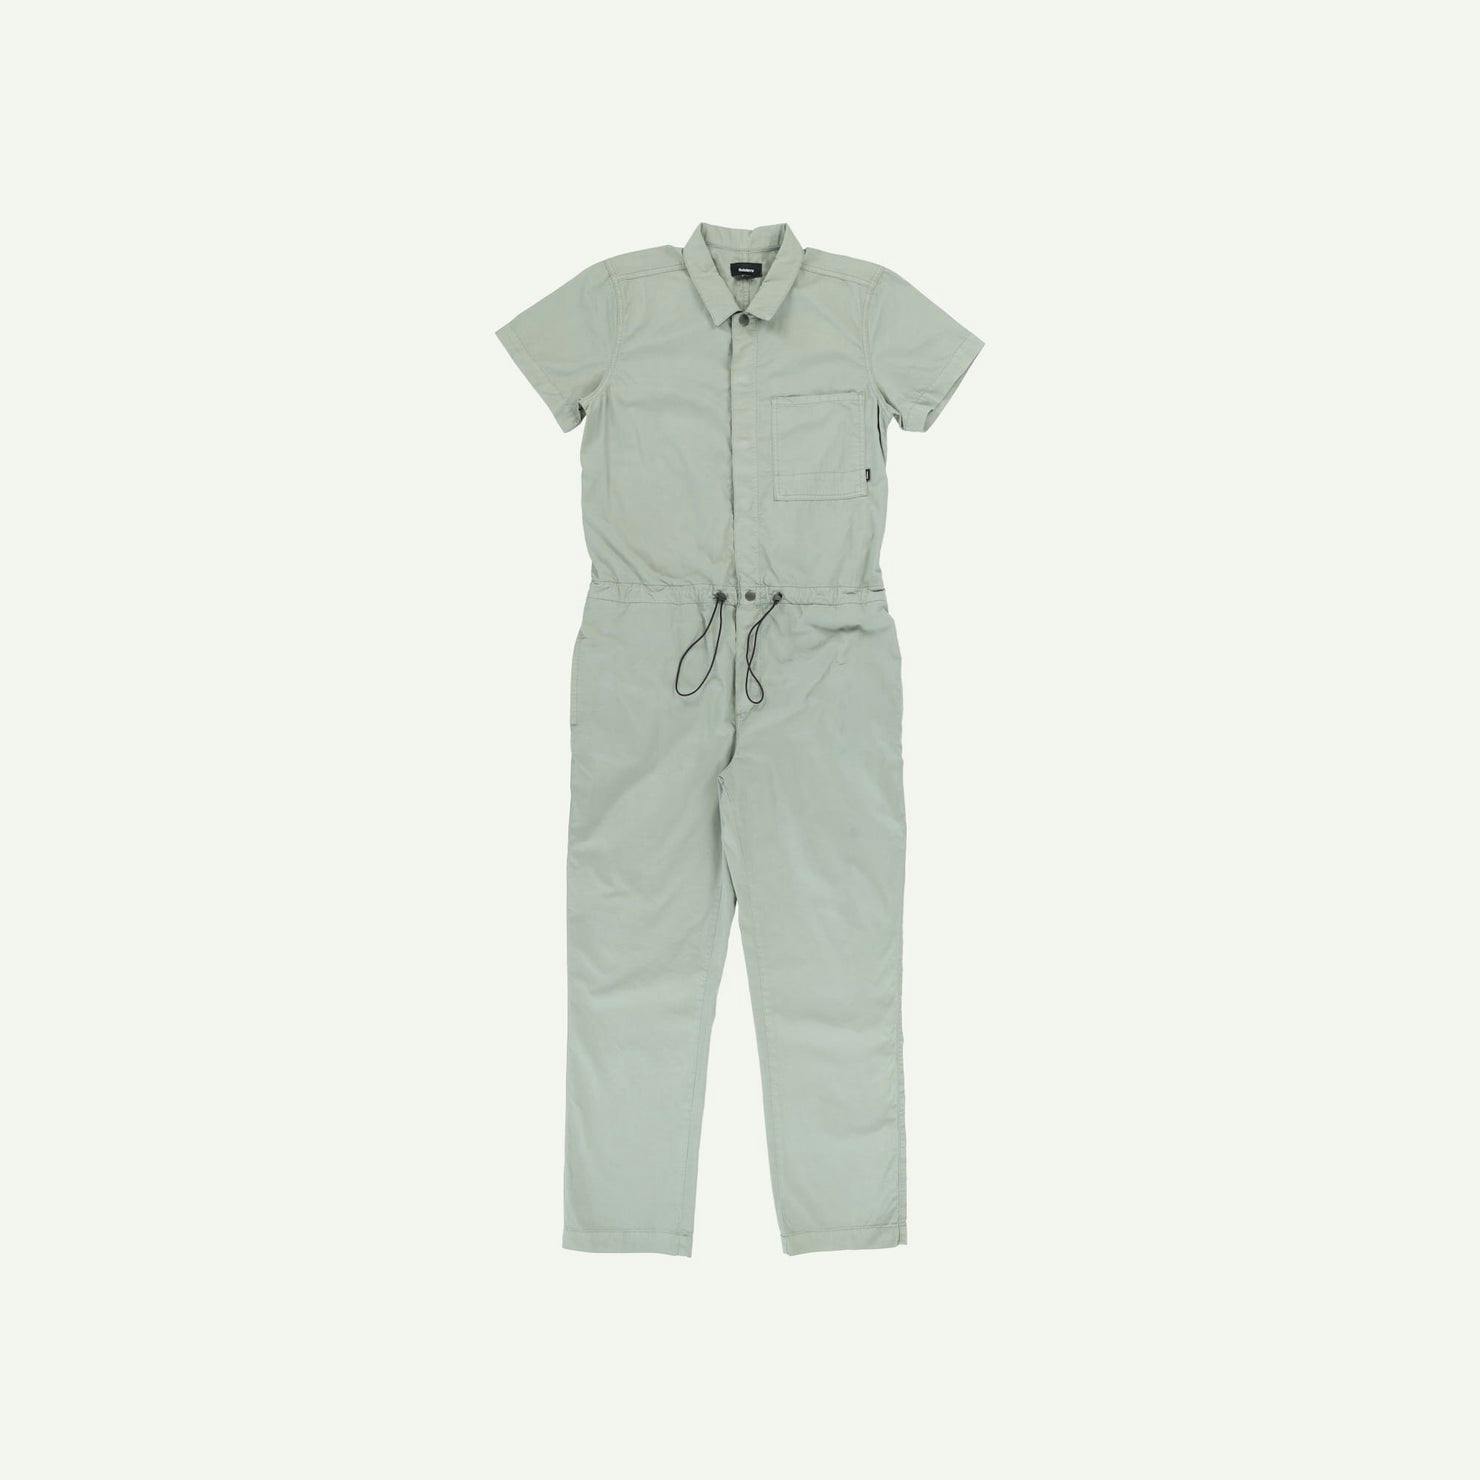 Finisterre As new Green Jumpsuit